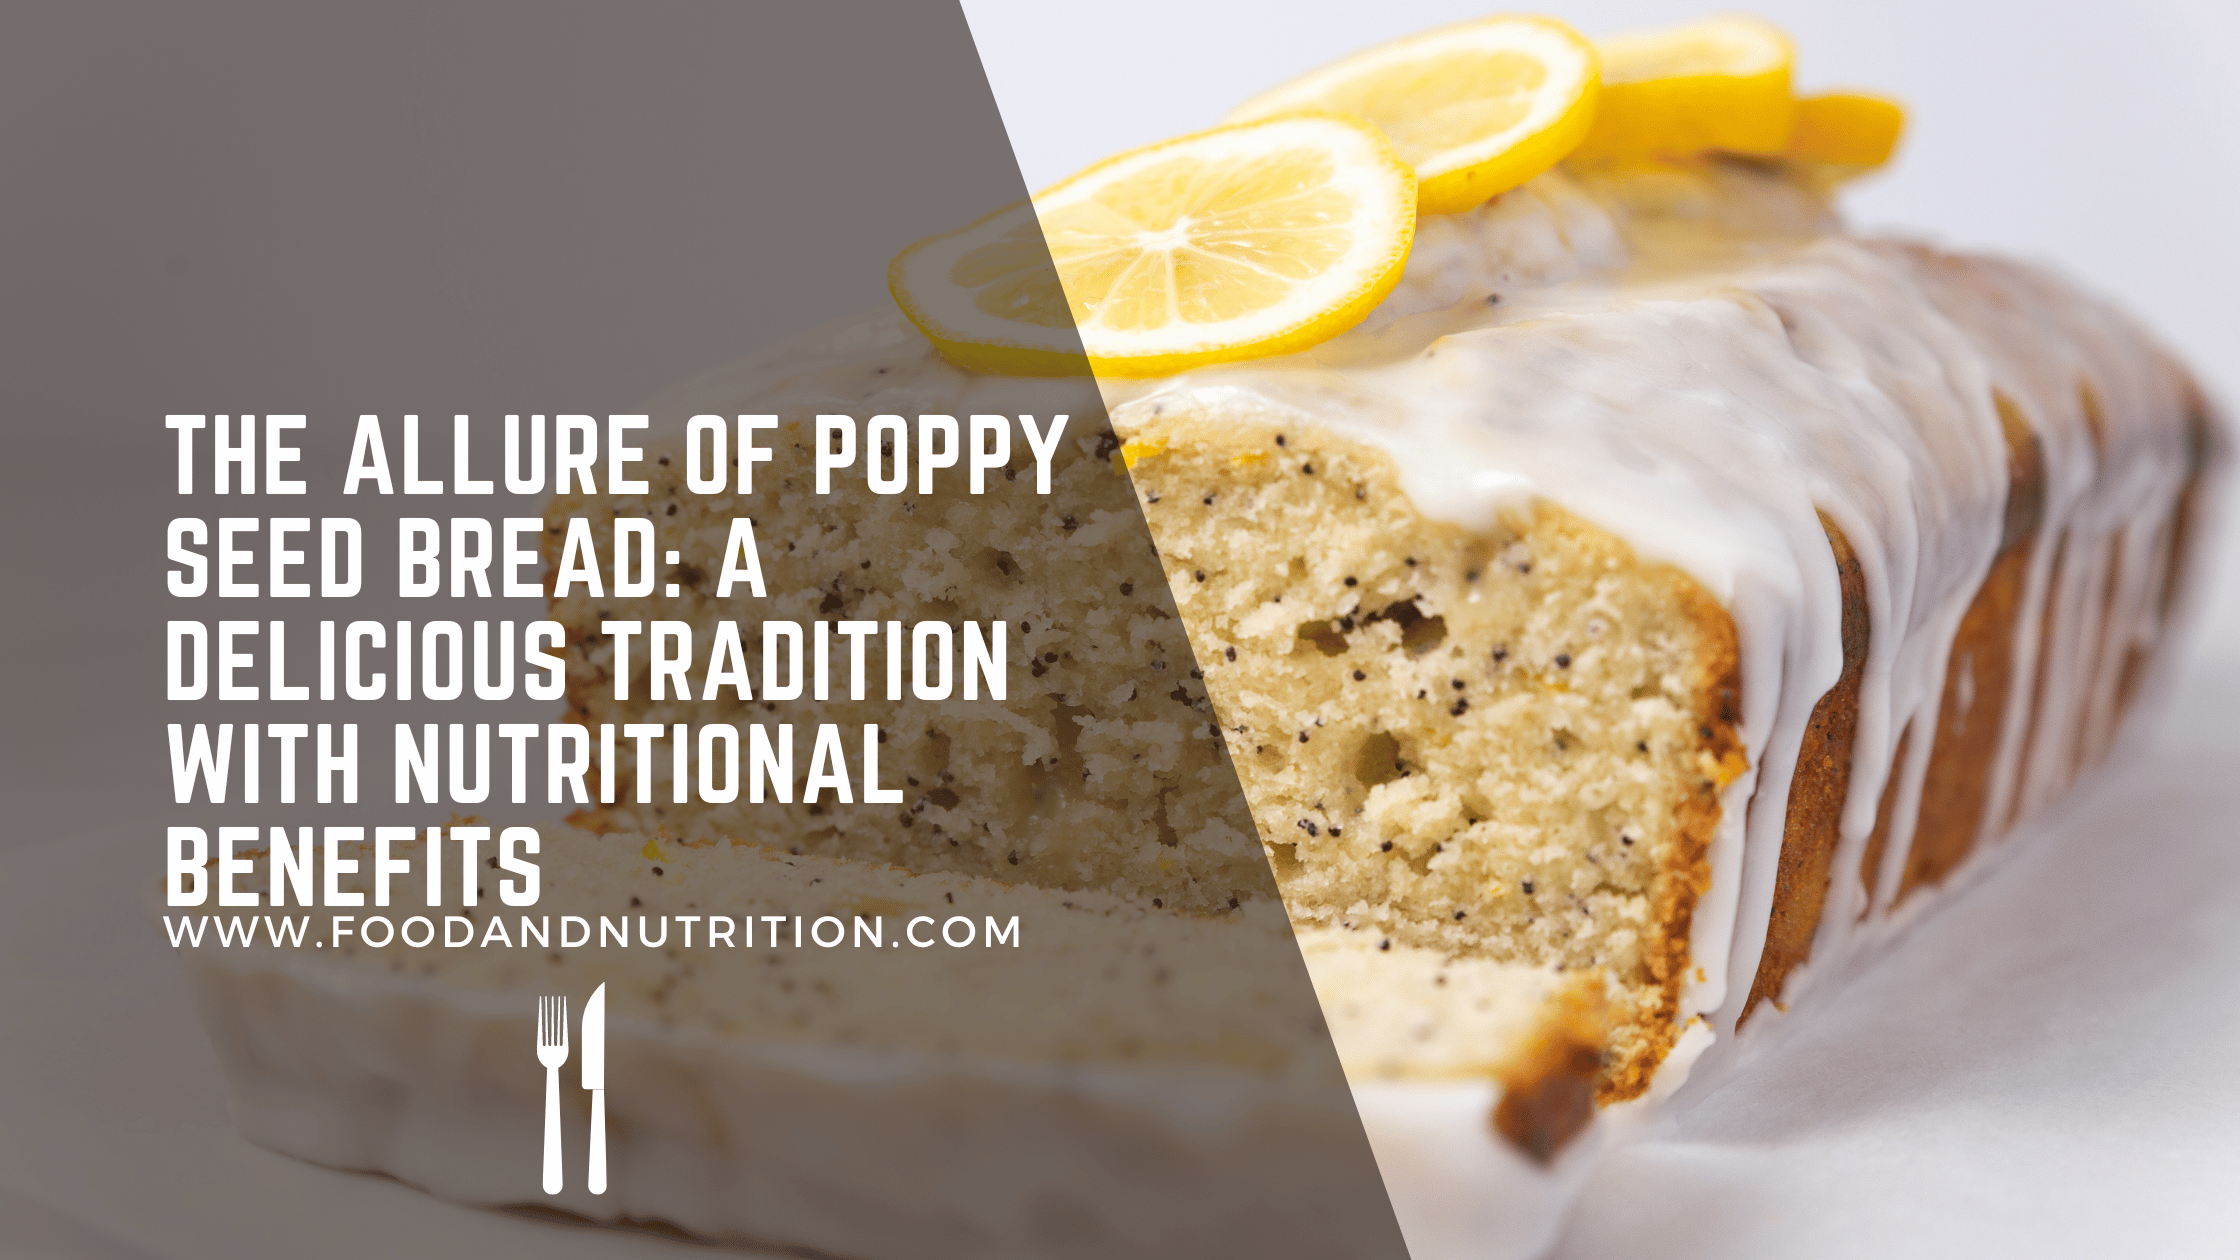 The Allure of Poppy Seed Bread: A Delicious Tradition with Nutritional Benefits